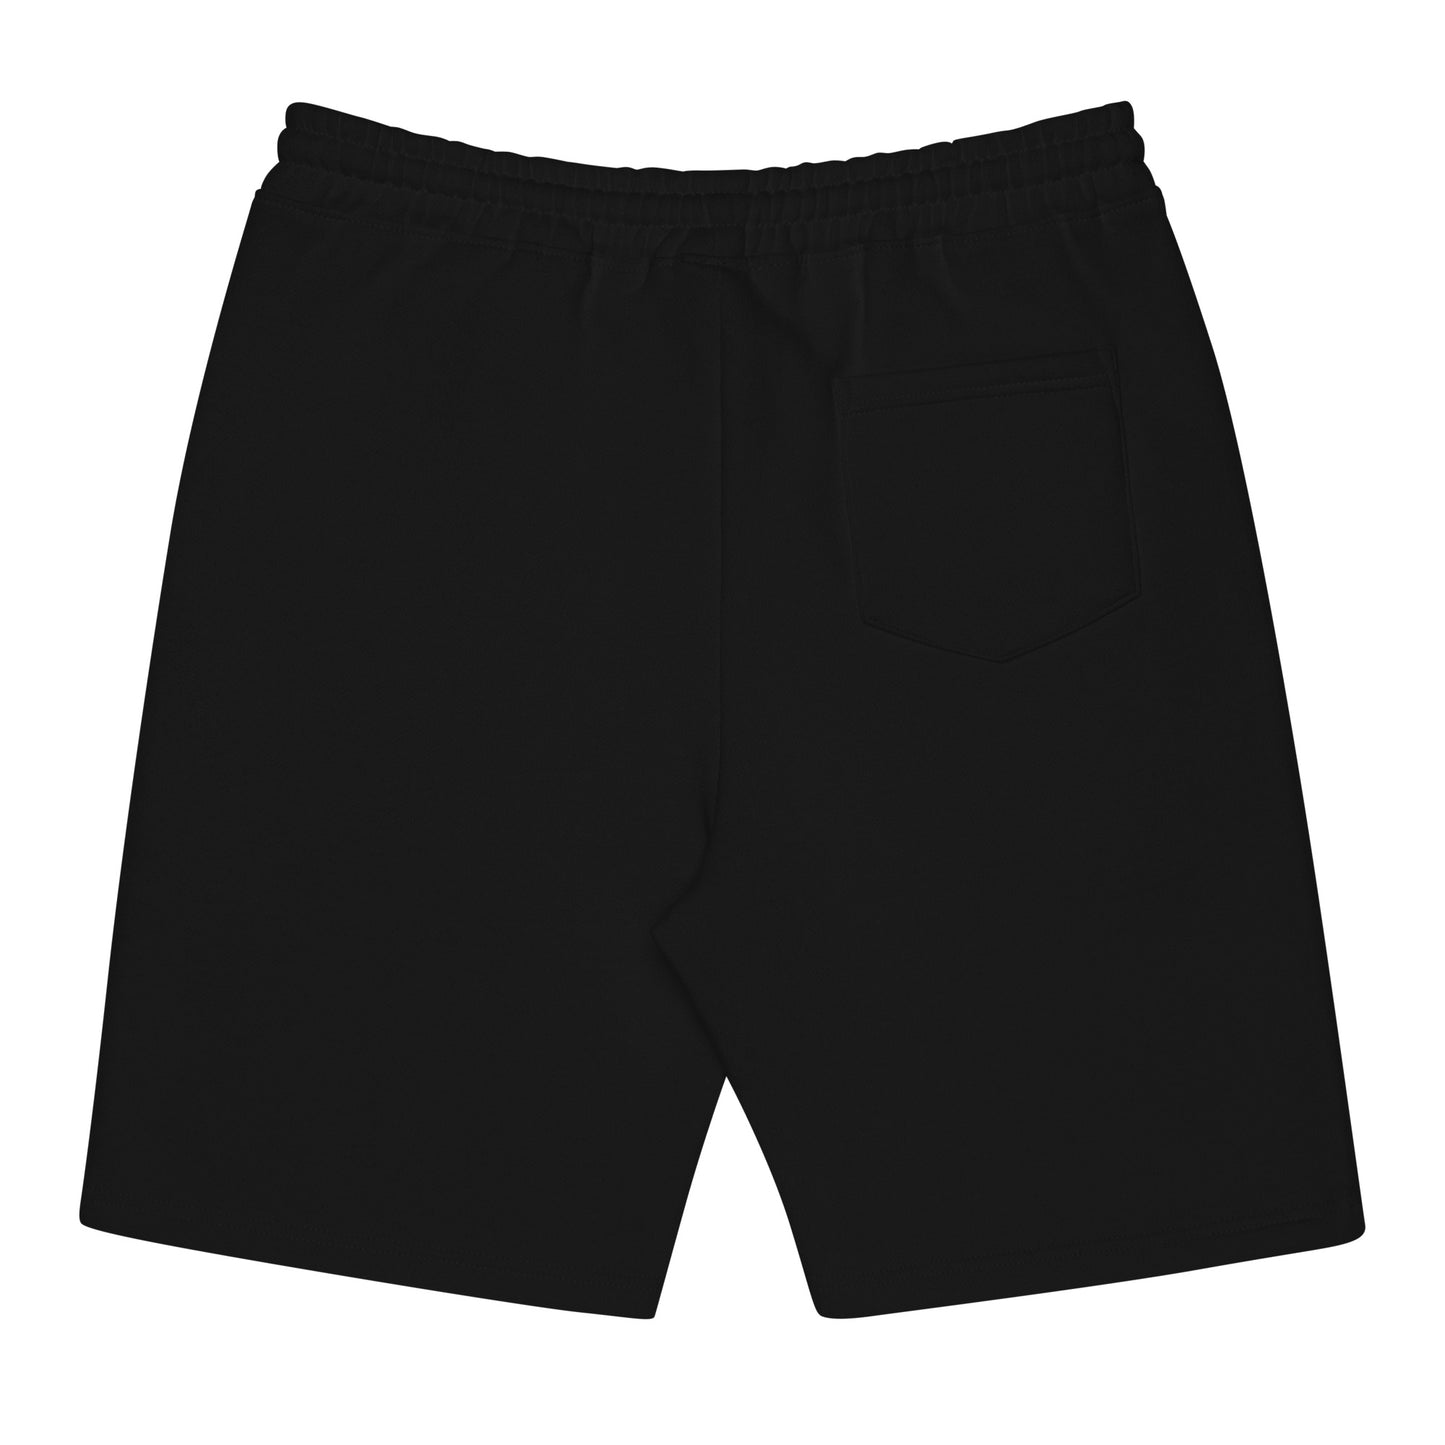 Embroidered Brand Logo Shorts